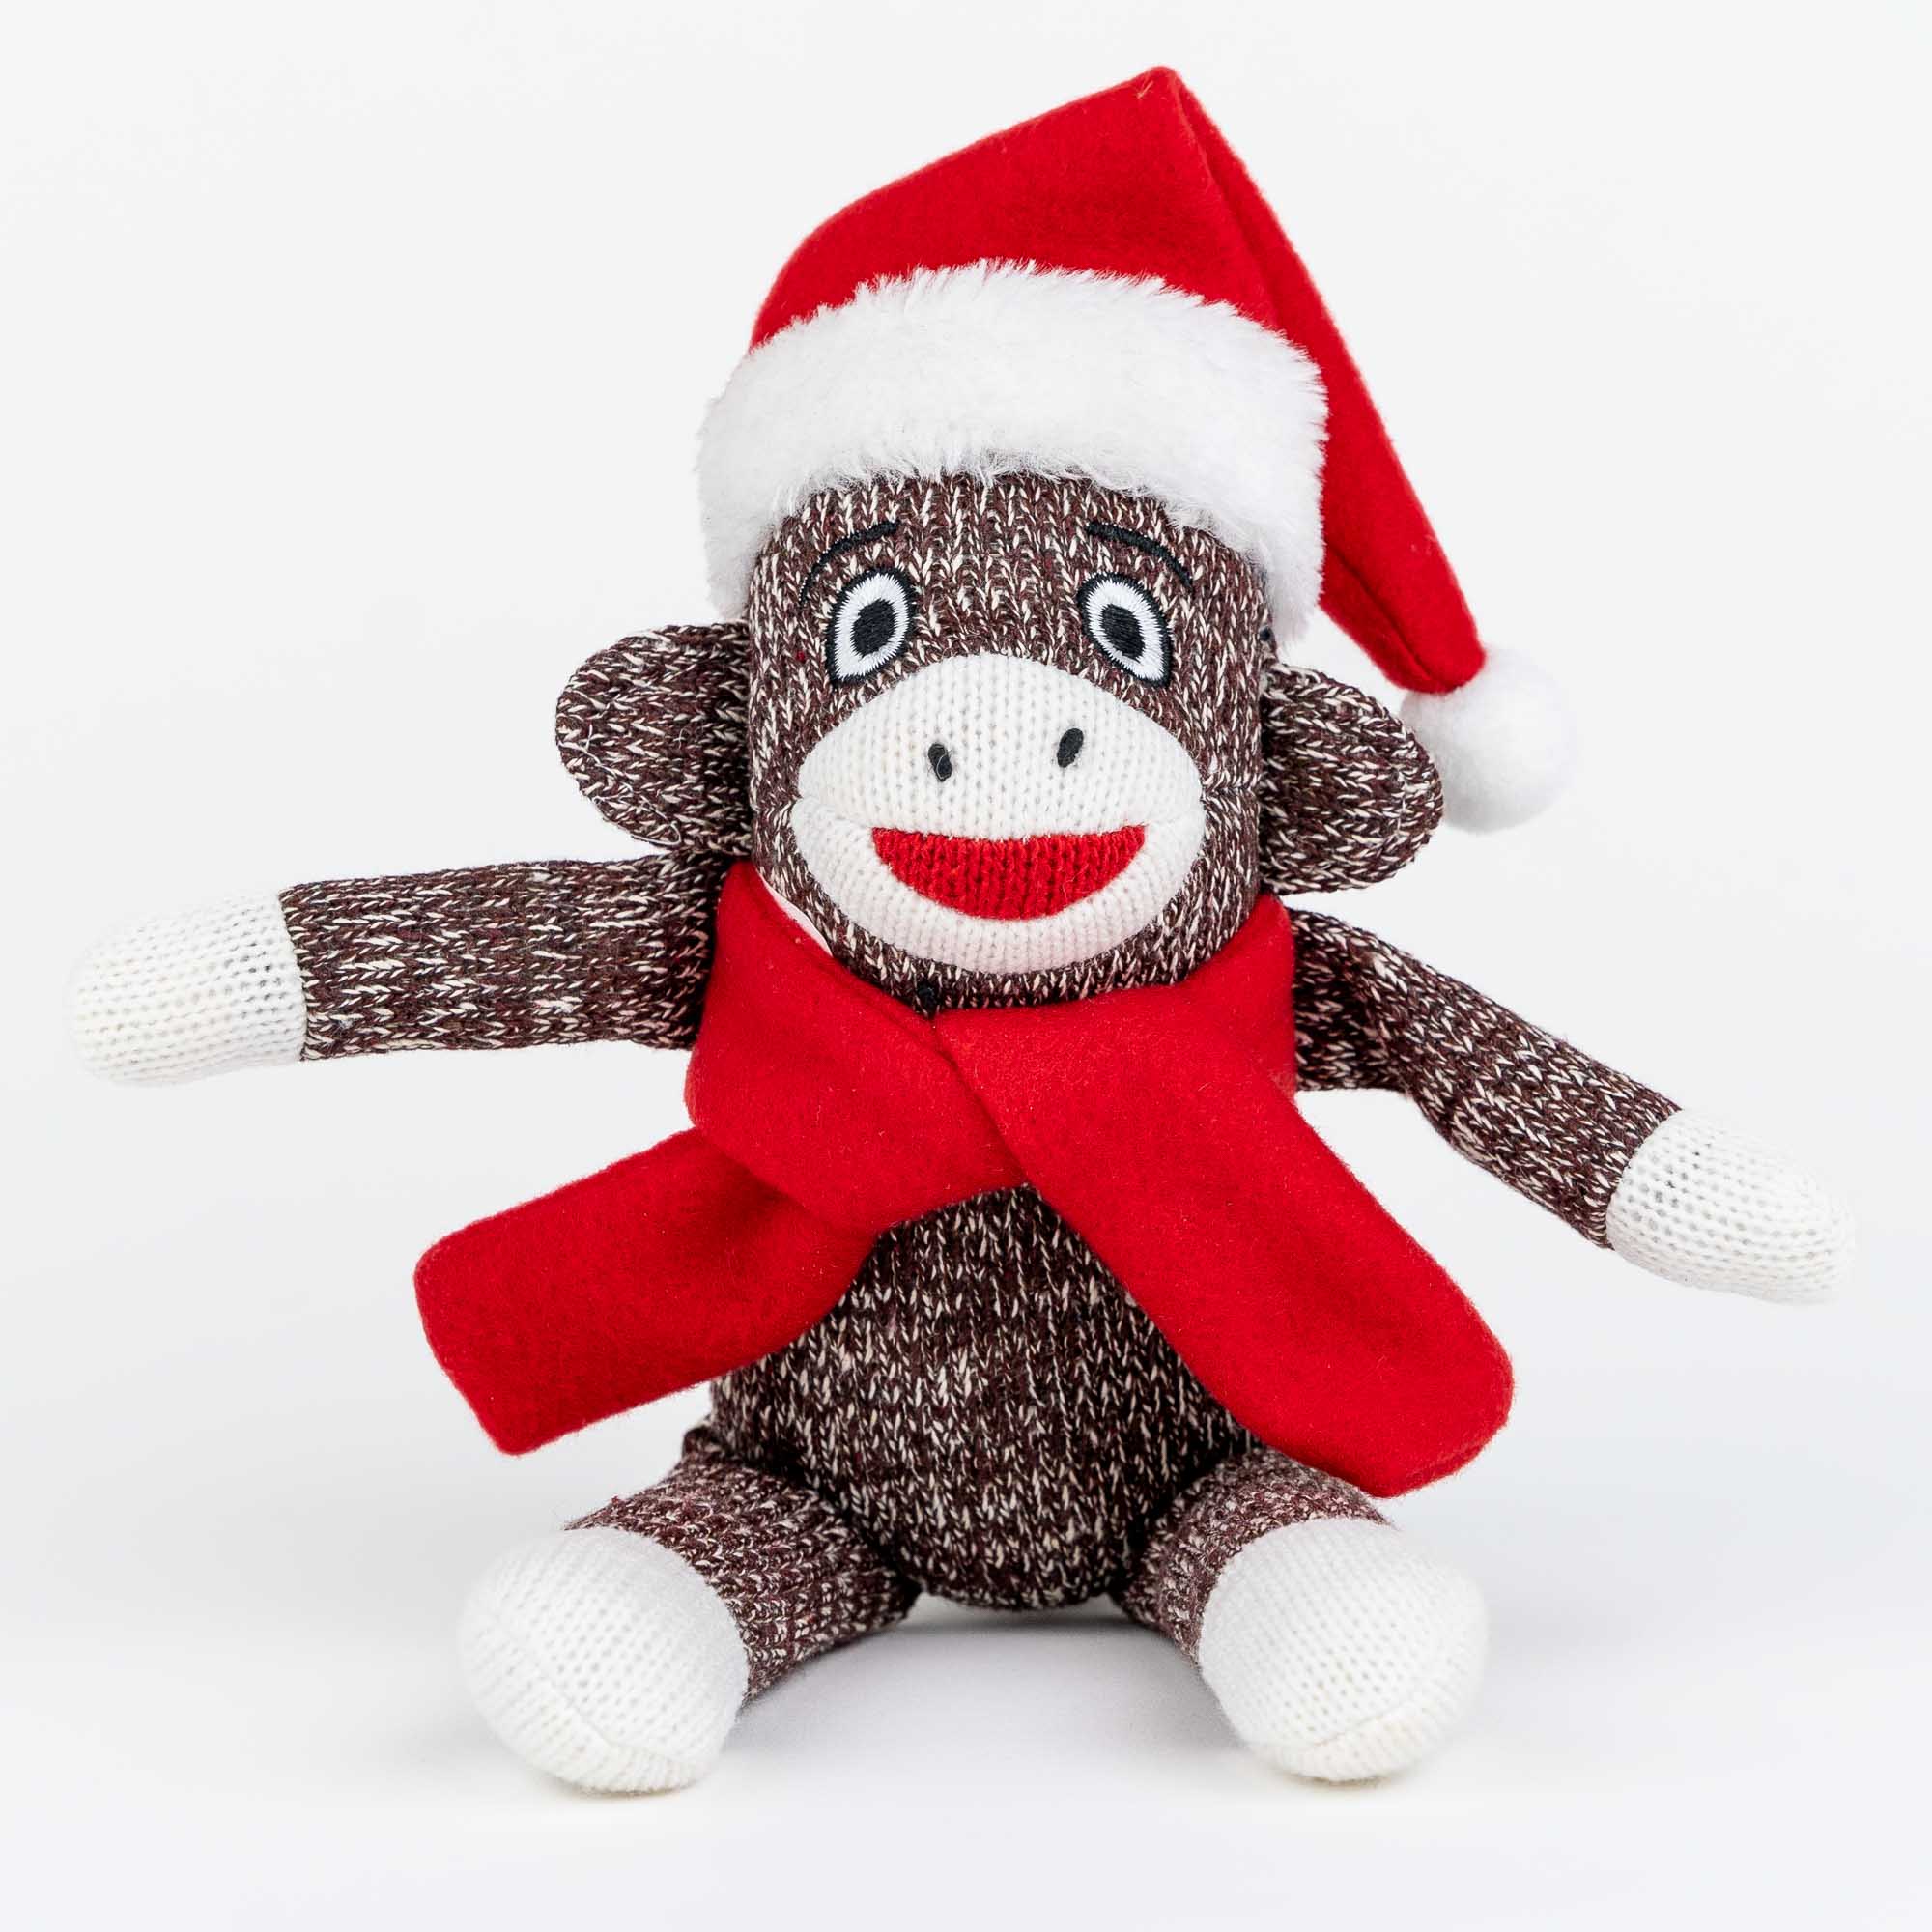 Image of Your Dog’s Very Own Christmas Santa Sock Monkey Toy- Early Black Friday Deal $9.91